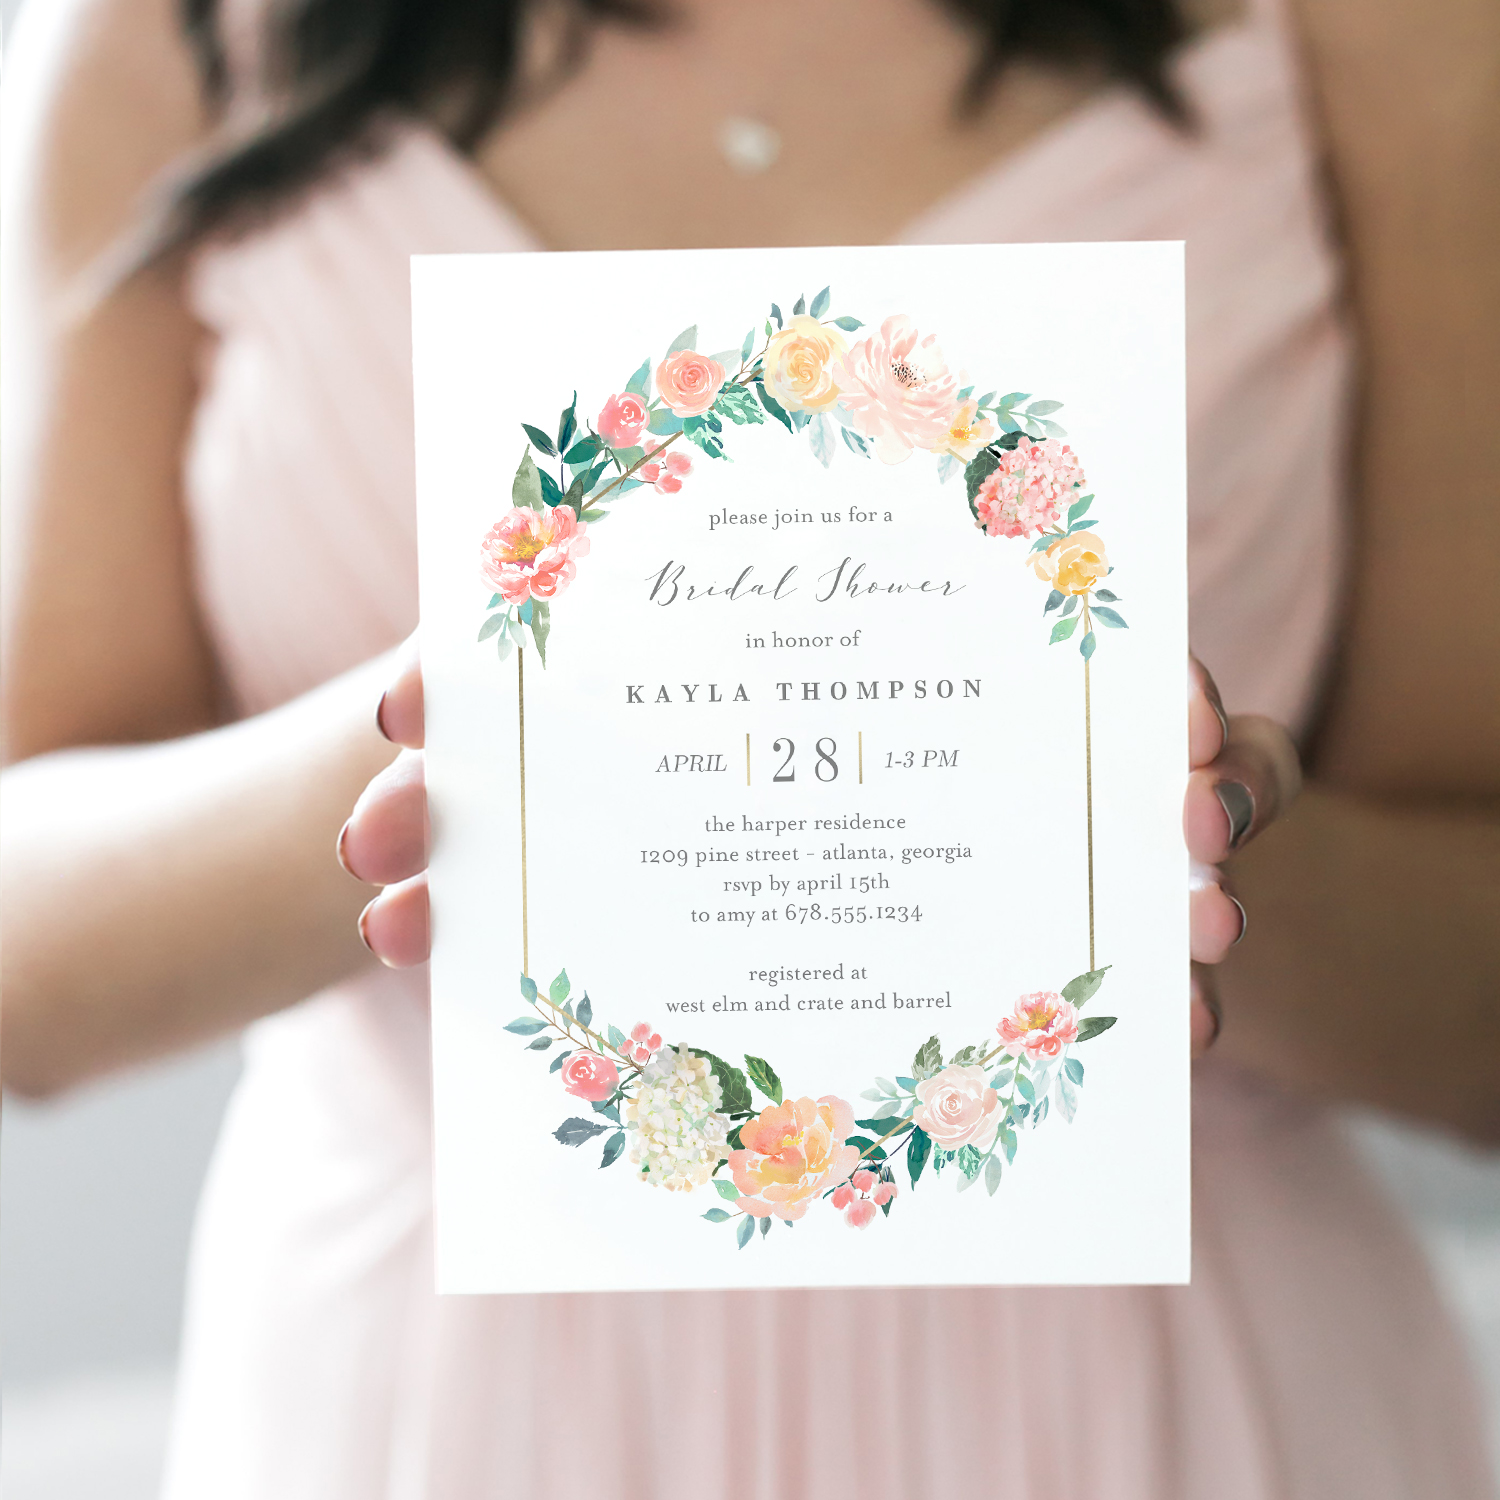 blush-floral-bridal-shower-invitation-bfc-berry-berry-sweet